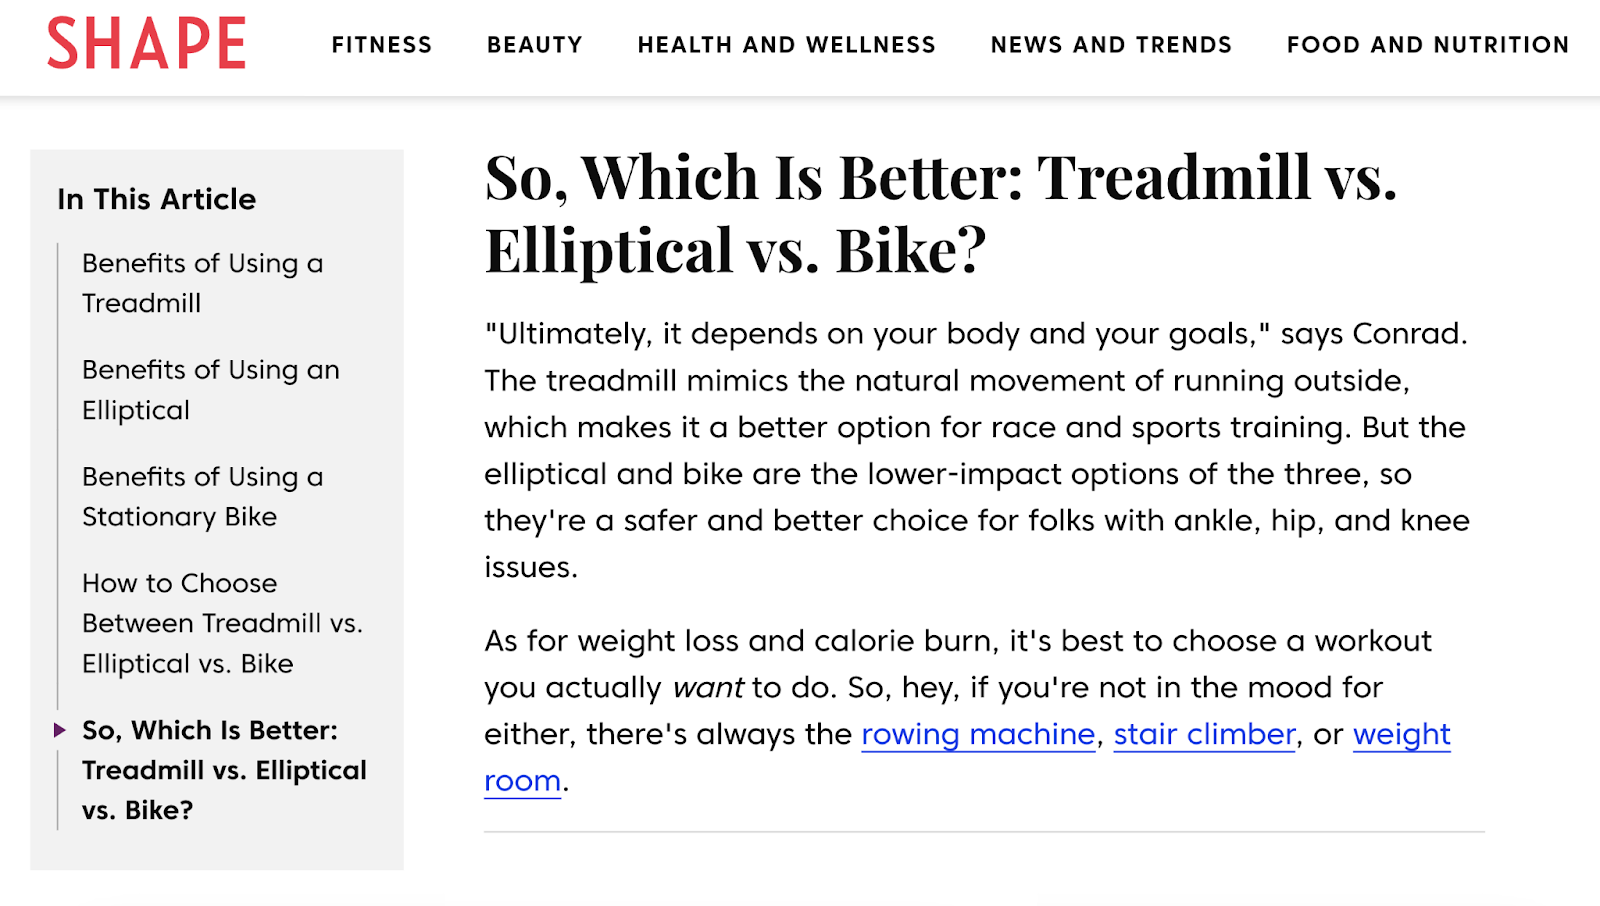 Shape's article conclusion ،led: "So, Which Is Better: Treadmill vs. Elliptical vs. Bike?"